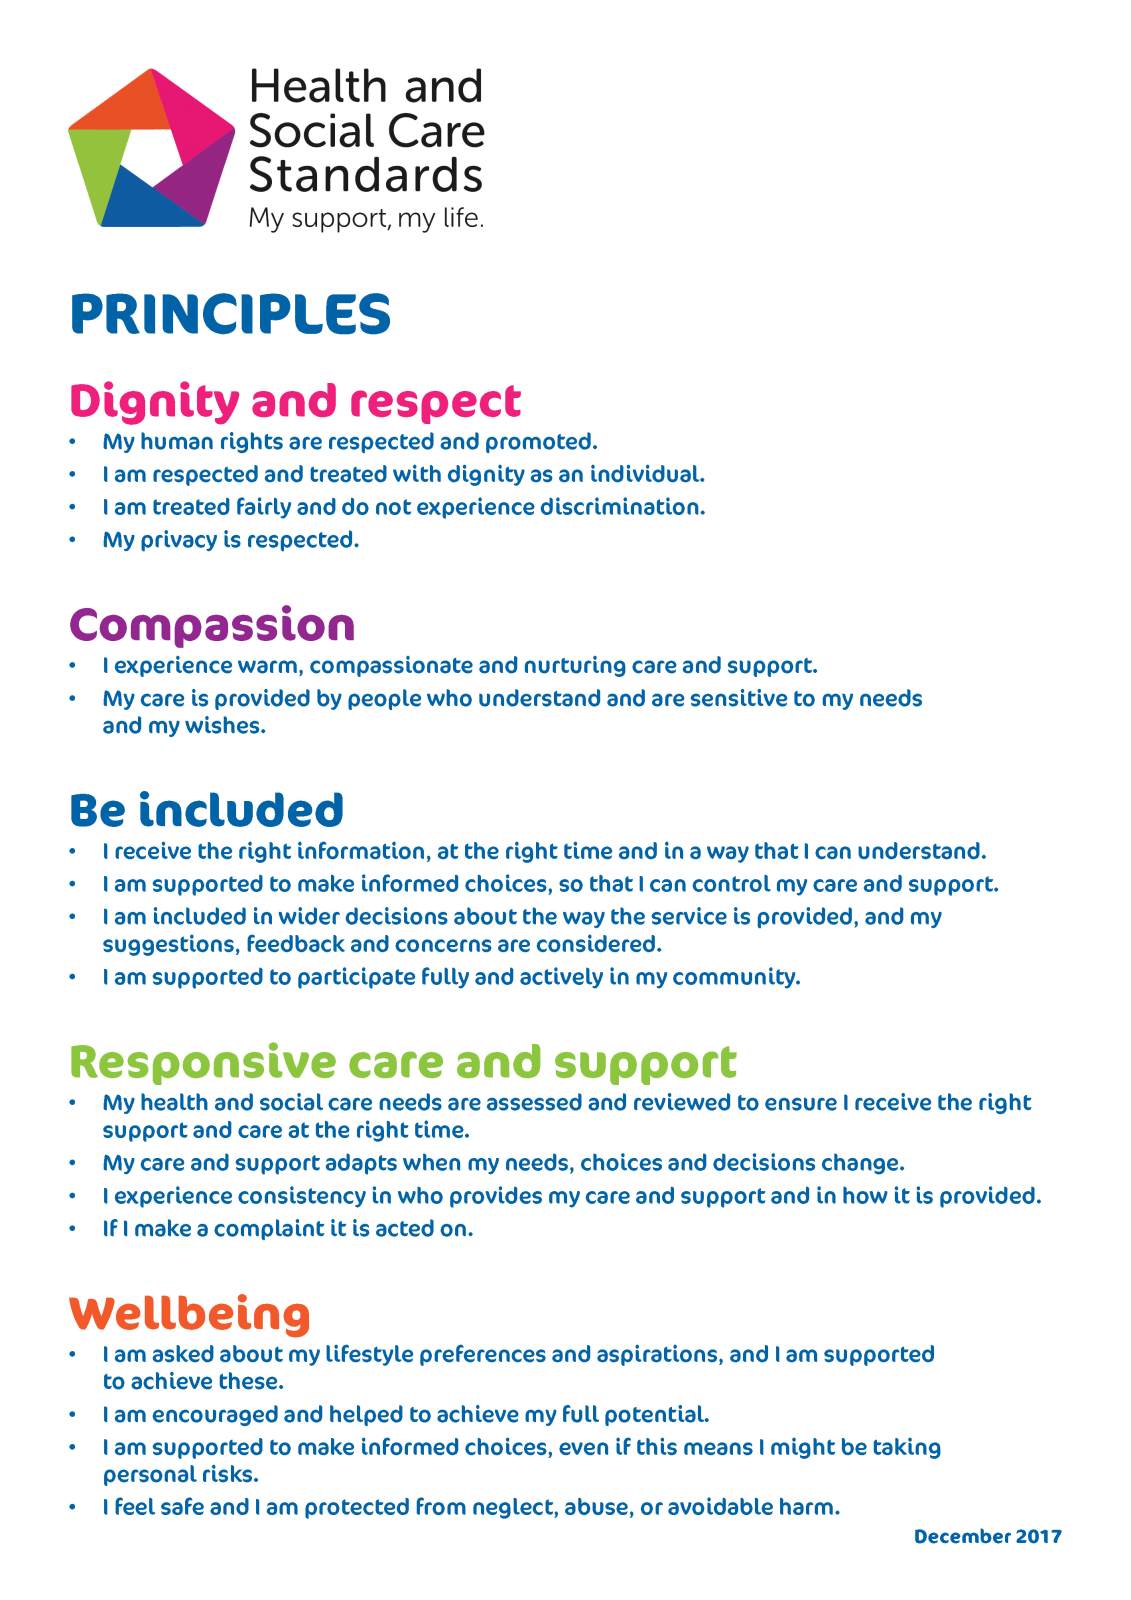 Health and Social Care Standards